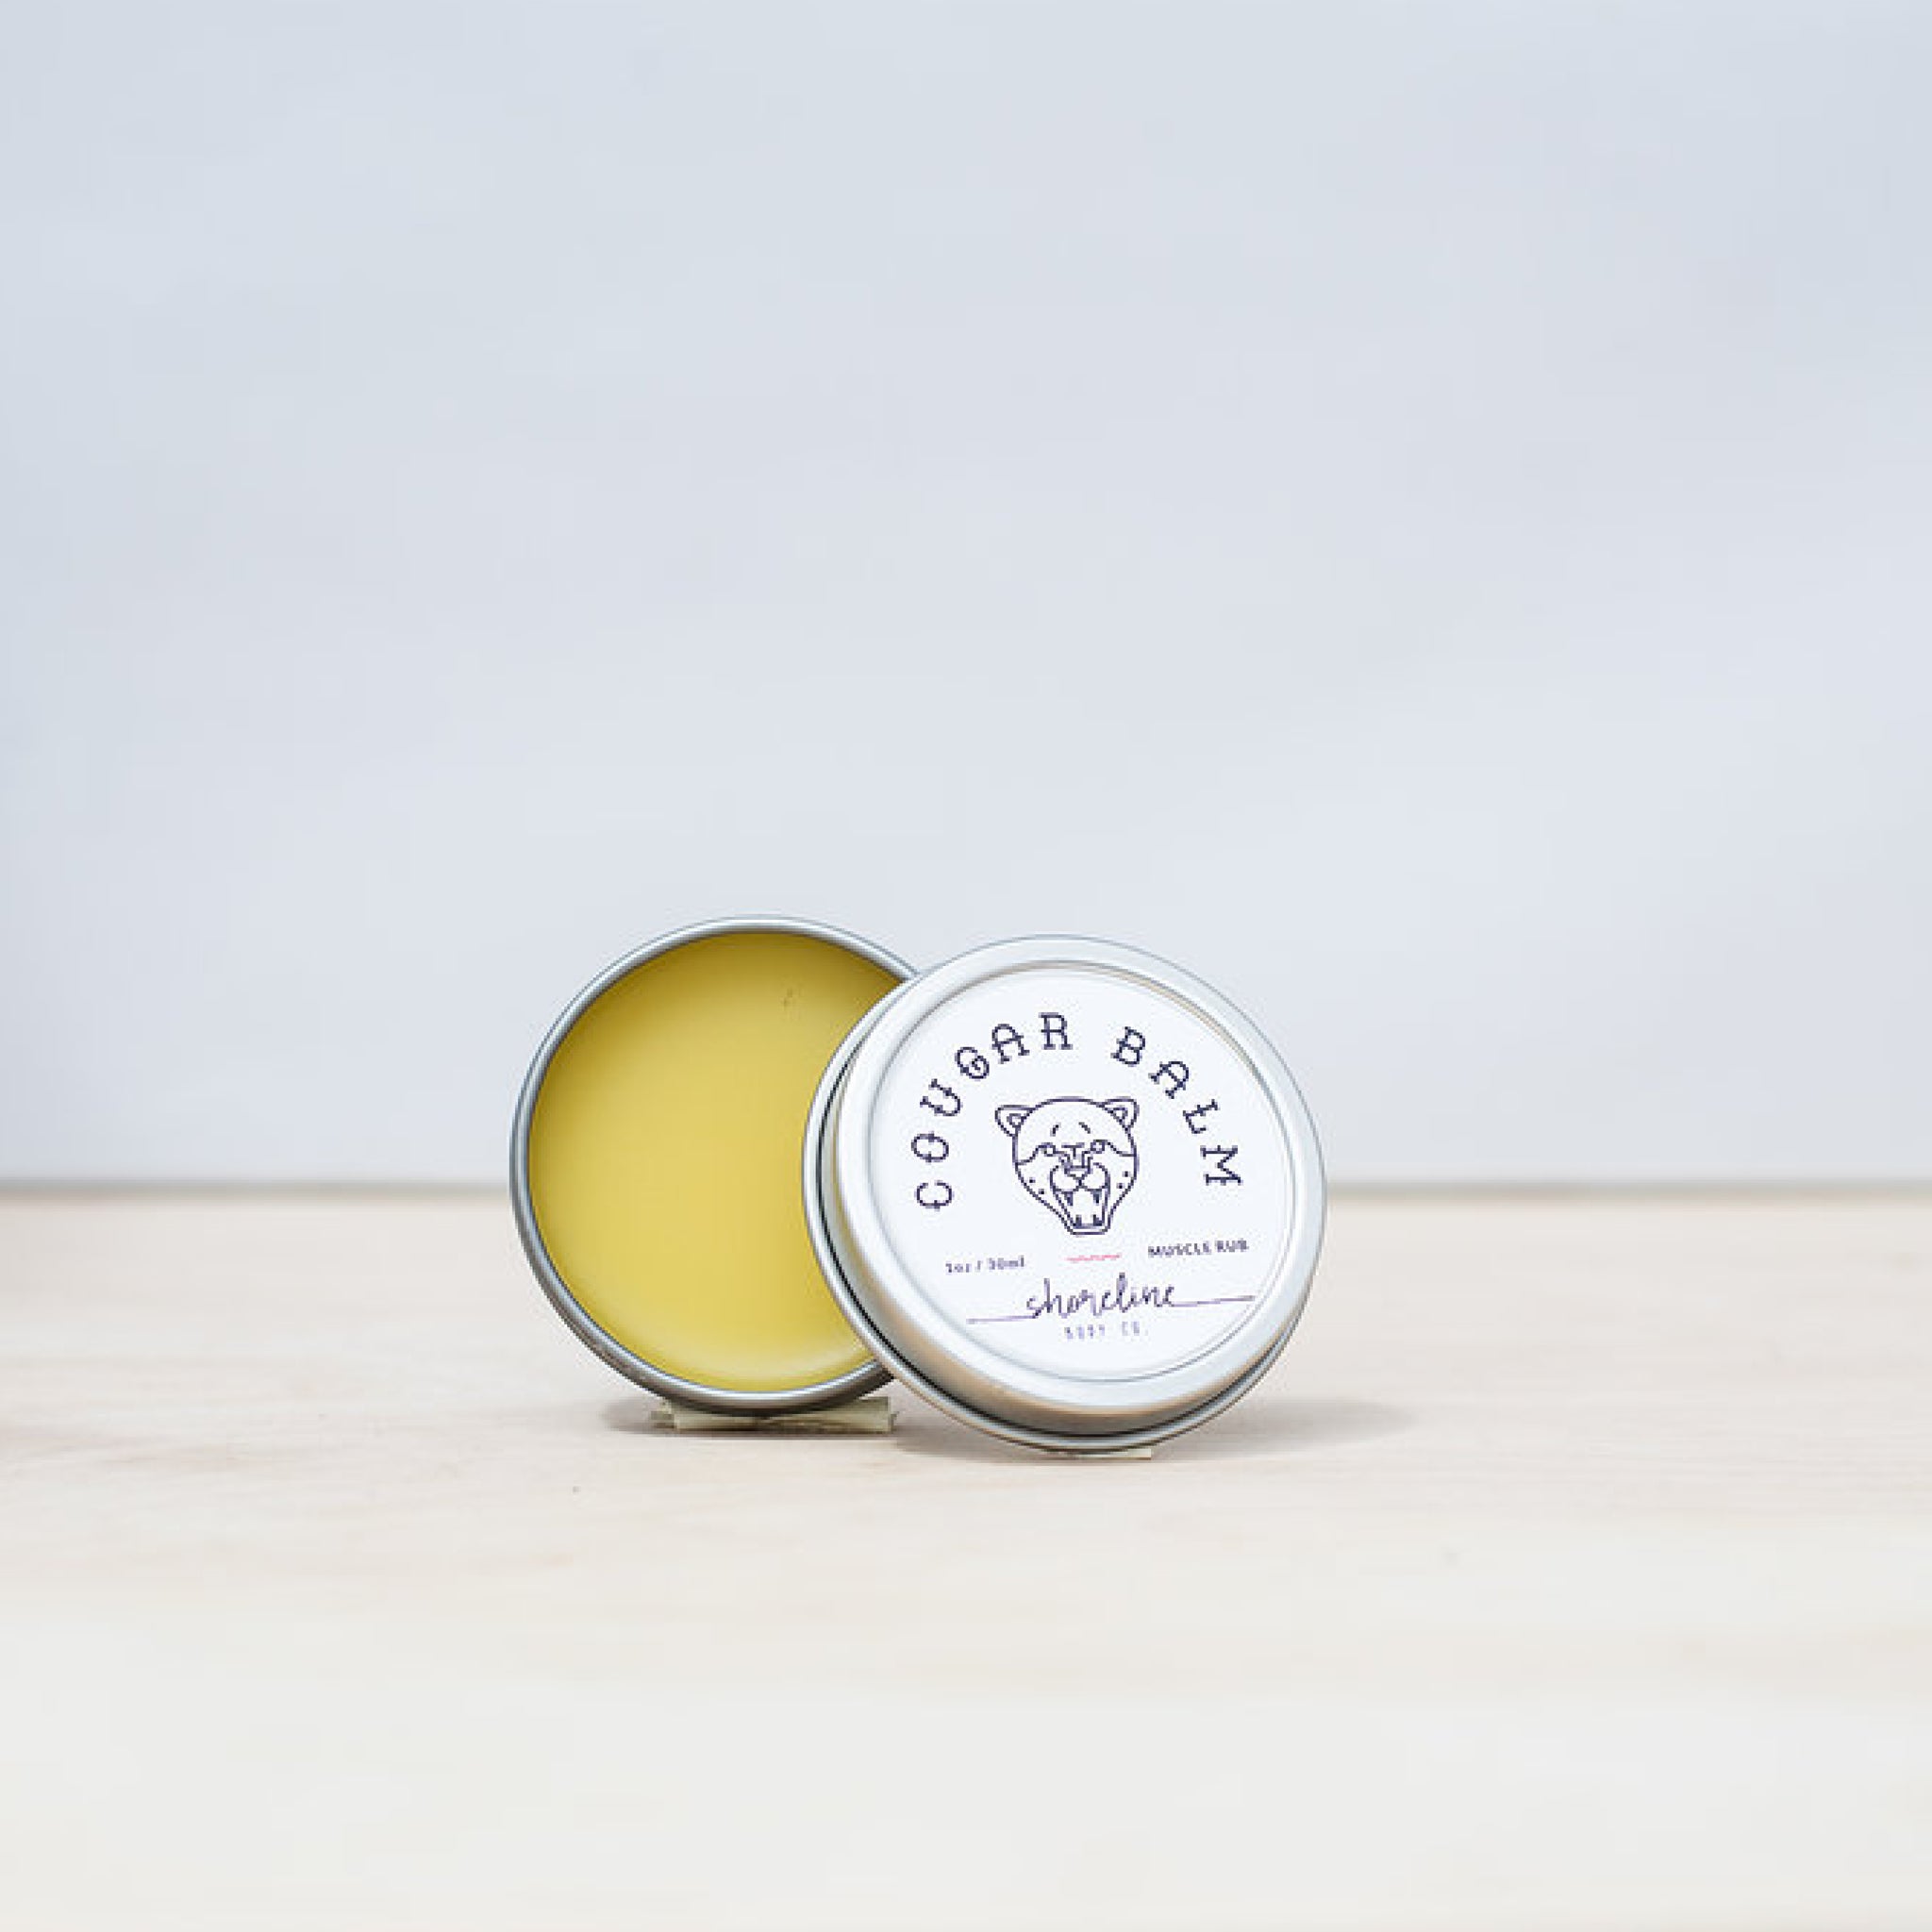 Cougar Balm, a soft pale yellow salve, is featured cap off with the lid leaning against it. 